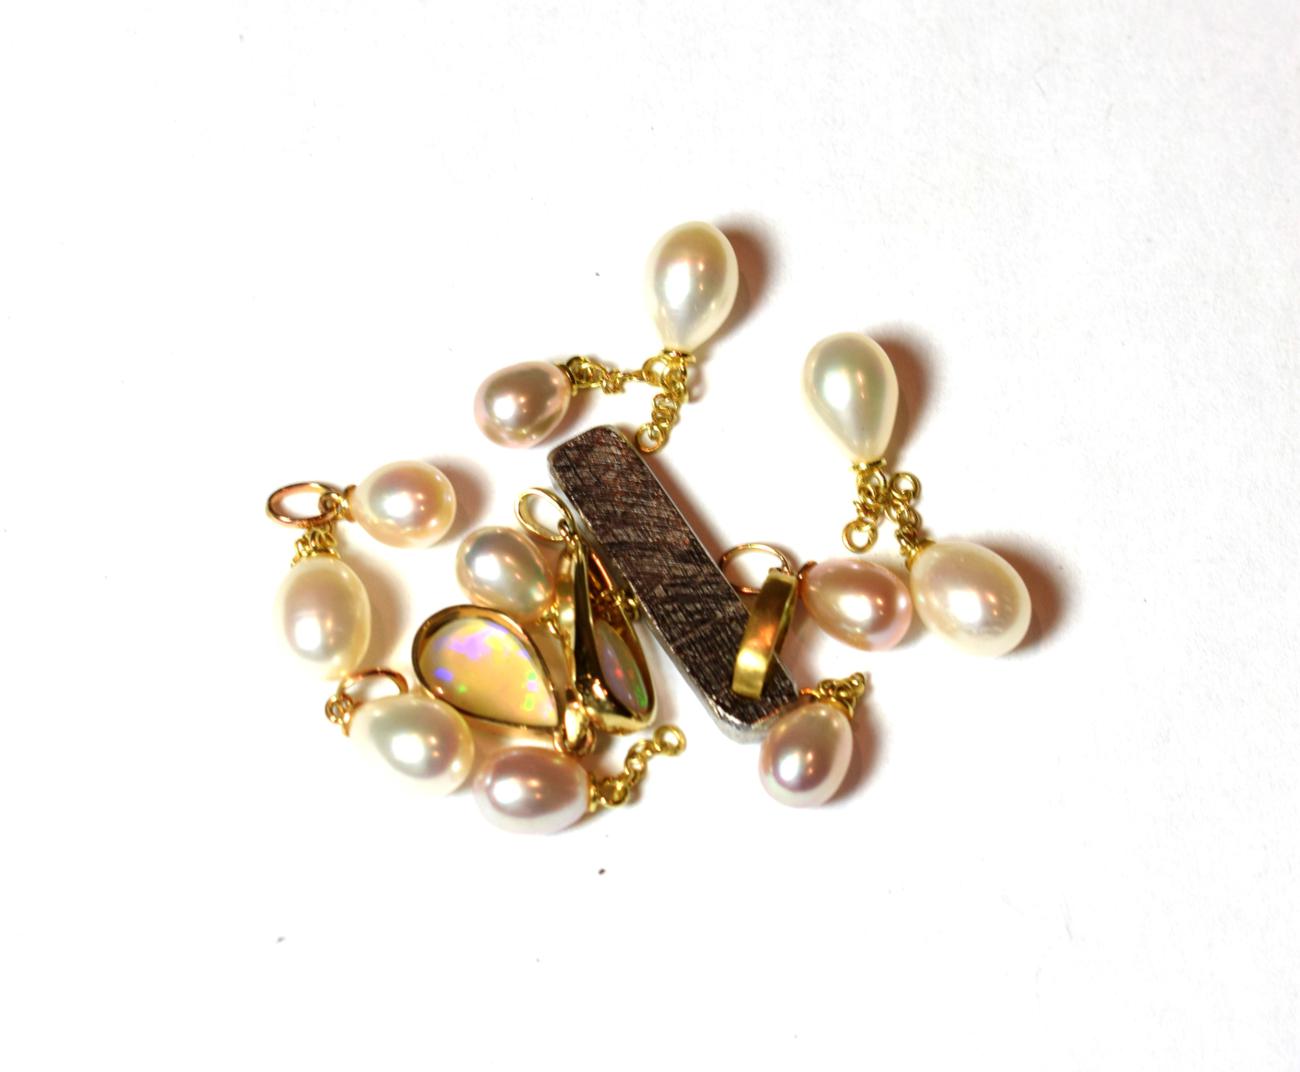 Eleven cultured pearl charms/pendants, unmarked; together with a 9 carat gold opal pendant, length